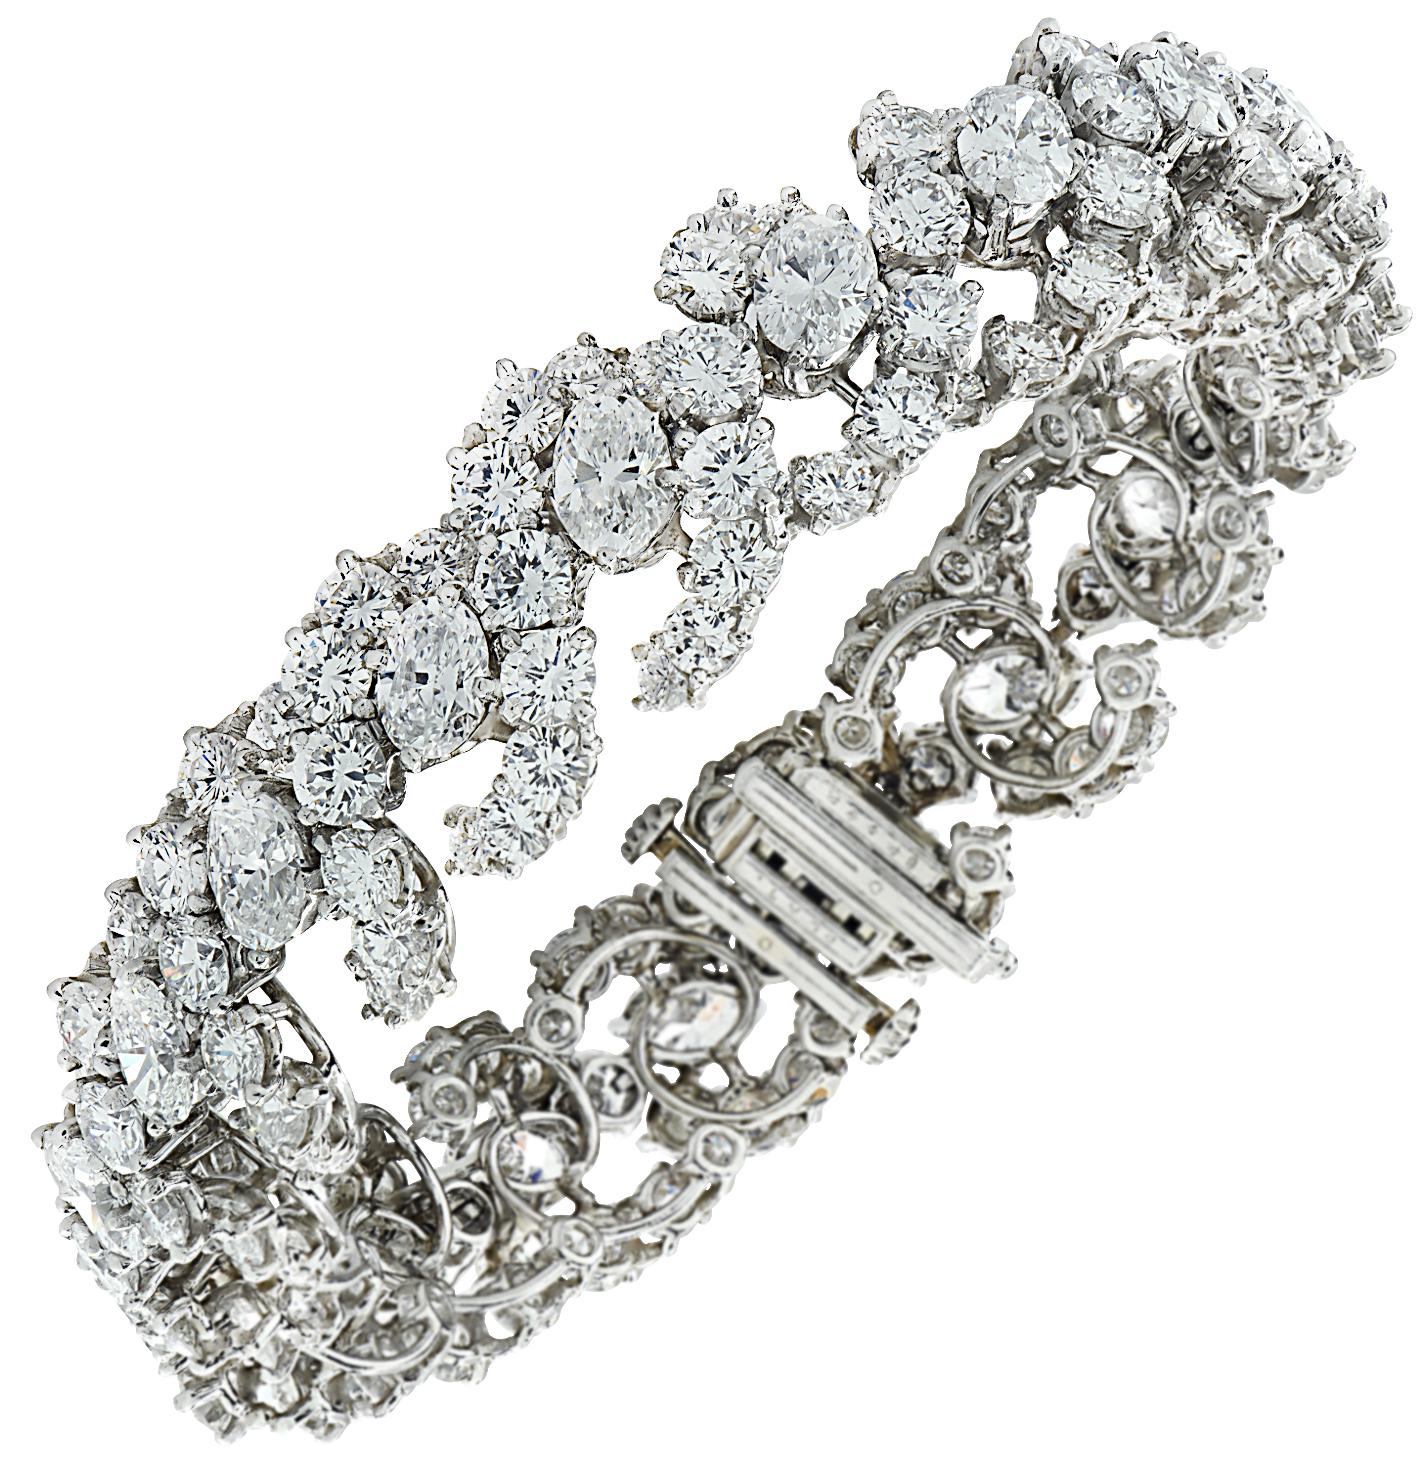 Sensational Oscar Heyman diamond bracelet circa 1963, finely crafted in platinum, featuring 19 Oval cut diamonds weighing 8.37 carats total, F-G color, VS clarity, 171 round brilliant cut diamonds weighing approximately 21.04 carats total, F-G